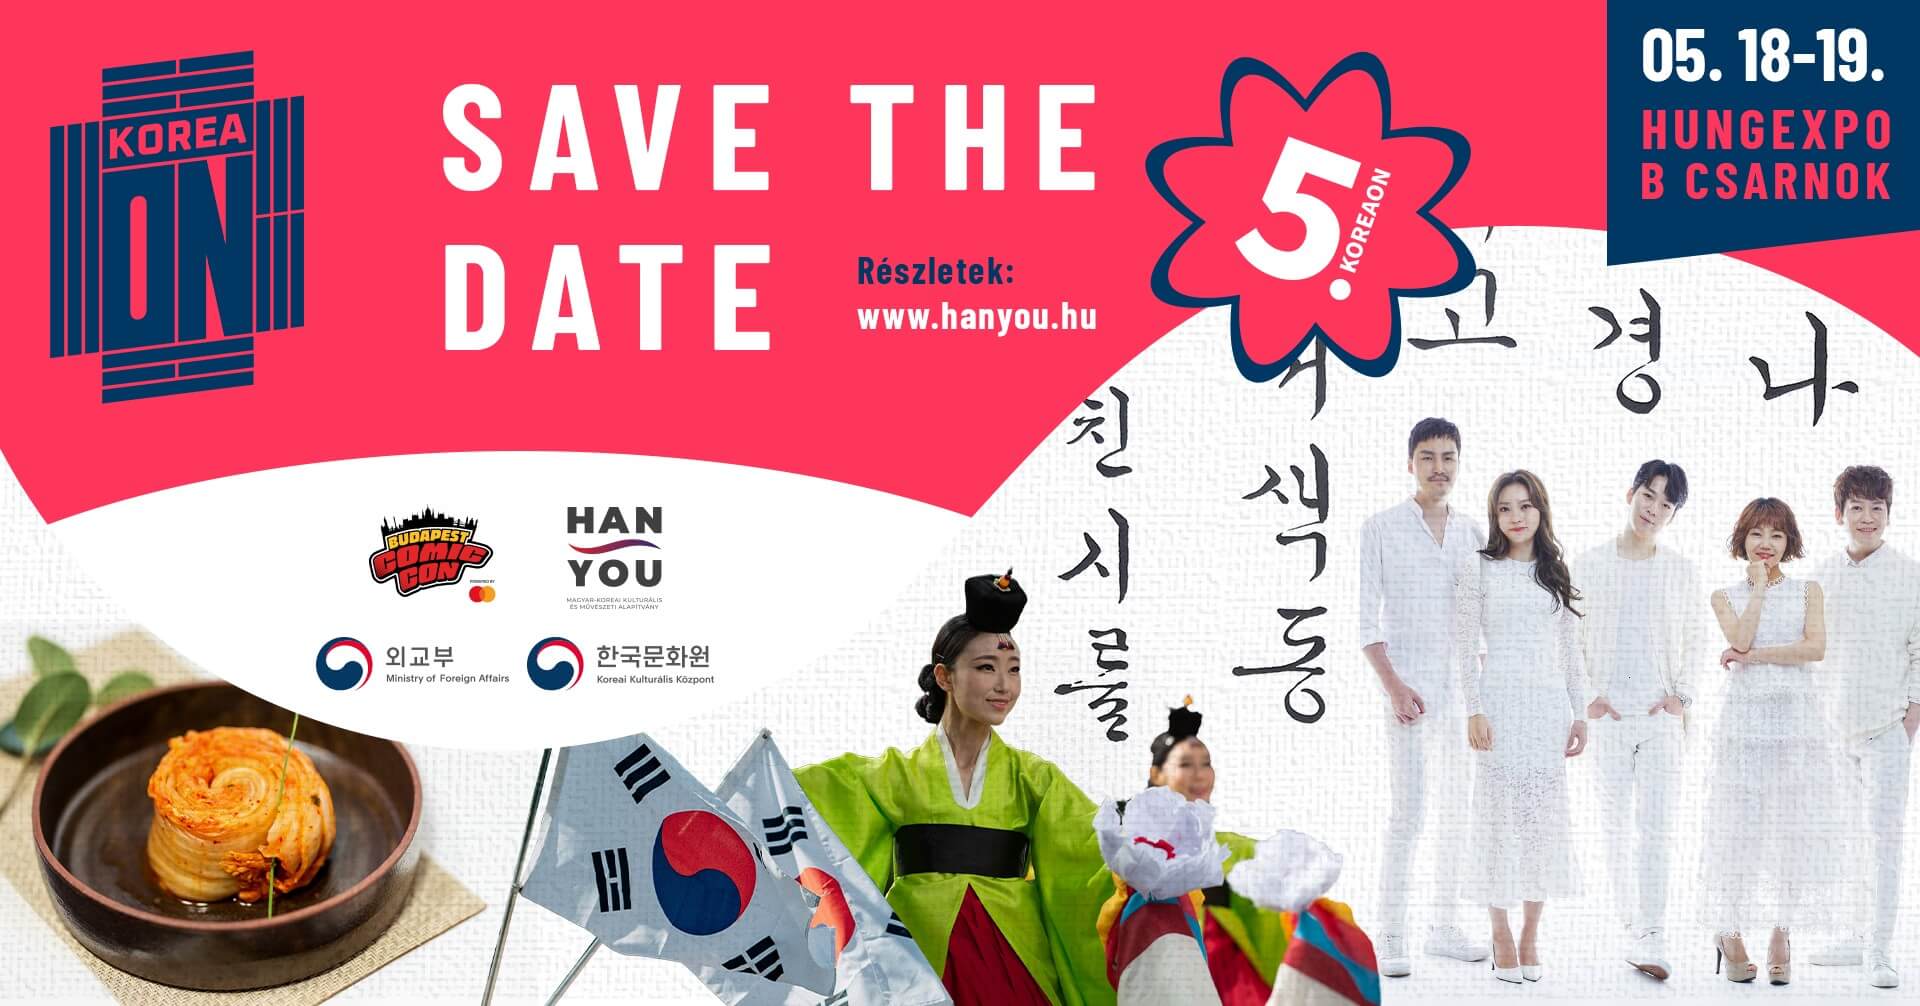 KoreaON Cultural Festival, Hungexpo Budapest, 18 - 19 May